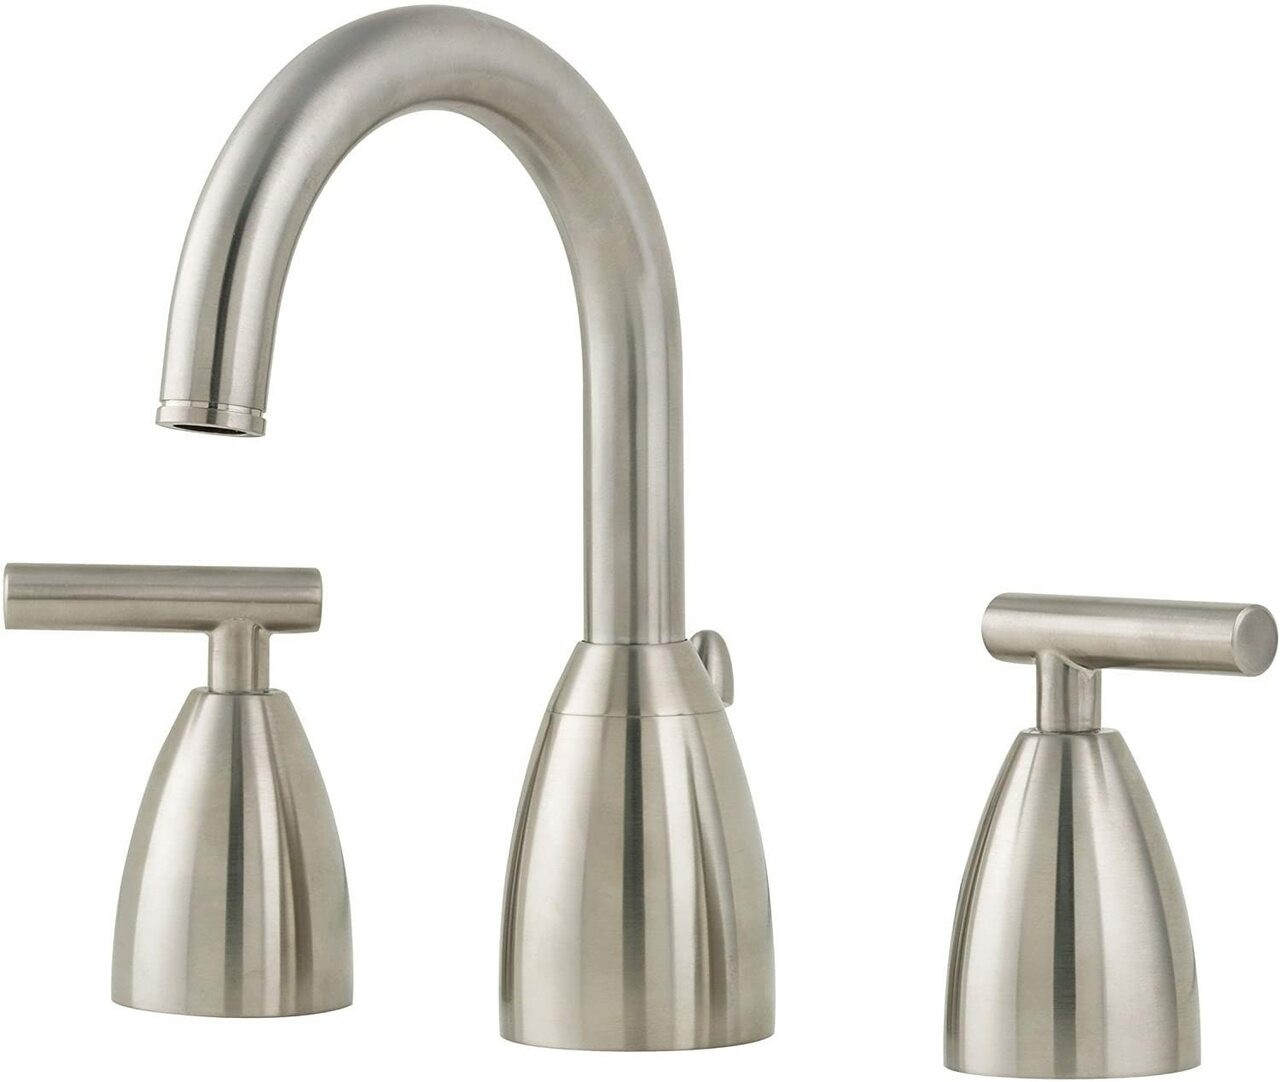 Pfister LF049NK00 Double Handle Bathroom Faucet, Brushed Nickel